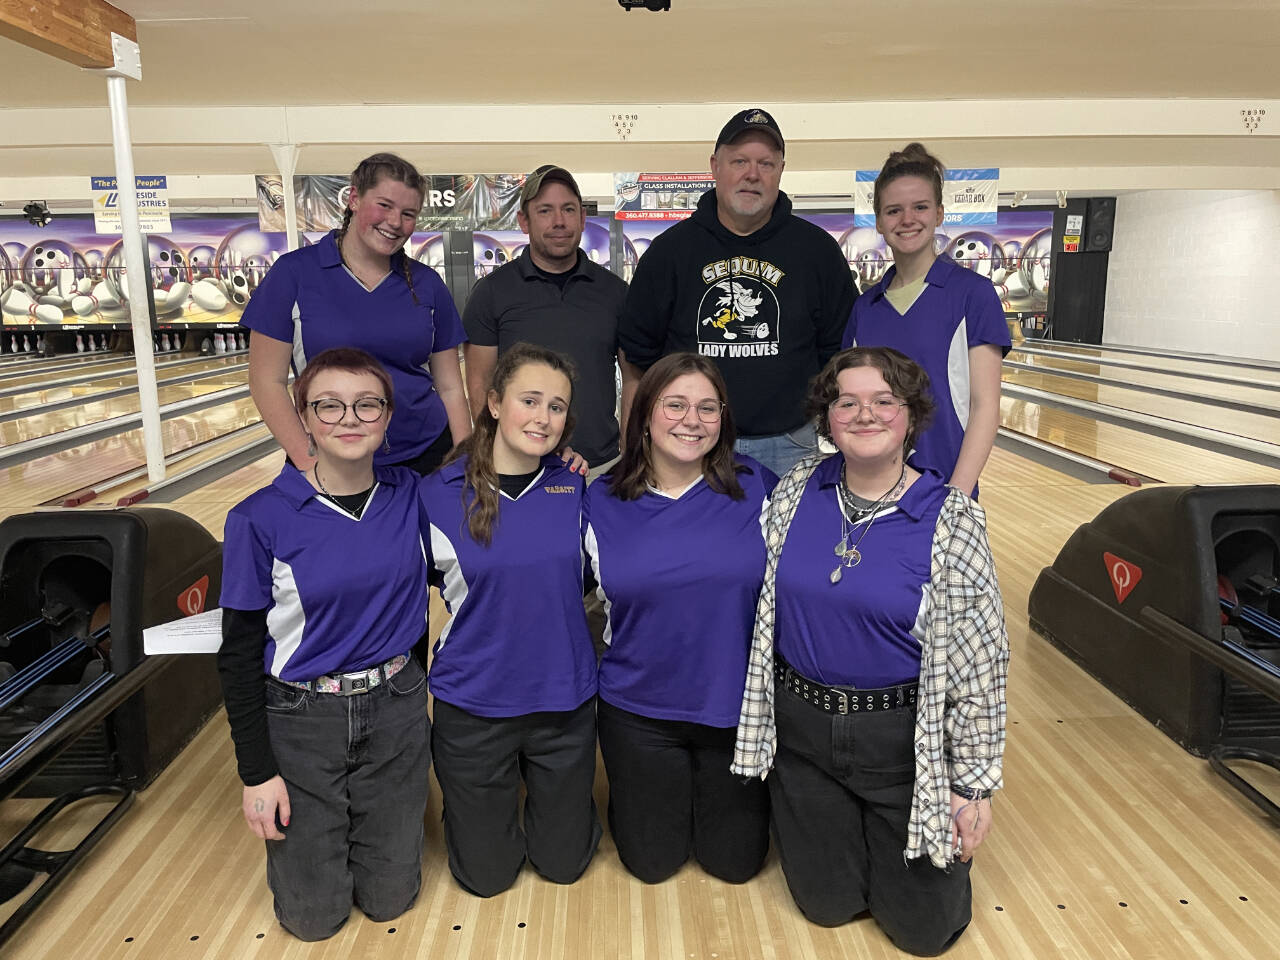 Submitted photo
Sequim High’s bowling squad heading to sub-districts includes (top row, from left) Skylar Krzyworz, assistant coach Jason Kelly, head coach Randy Perry and Jovi Weller, with (front row, from left) Kimberly Heintz, Nikoline Updike, Morgan Kayser and Tilly Lundstrom.